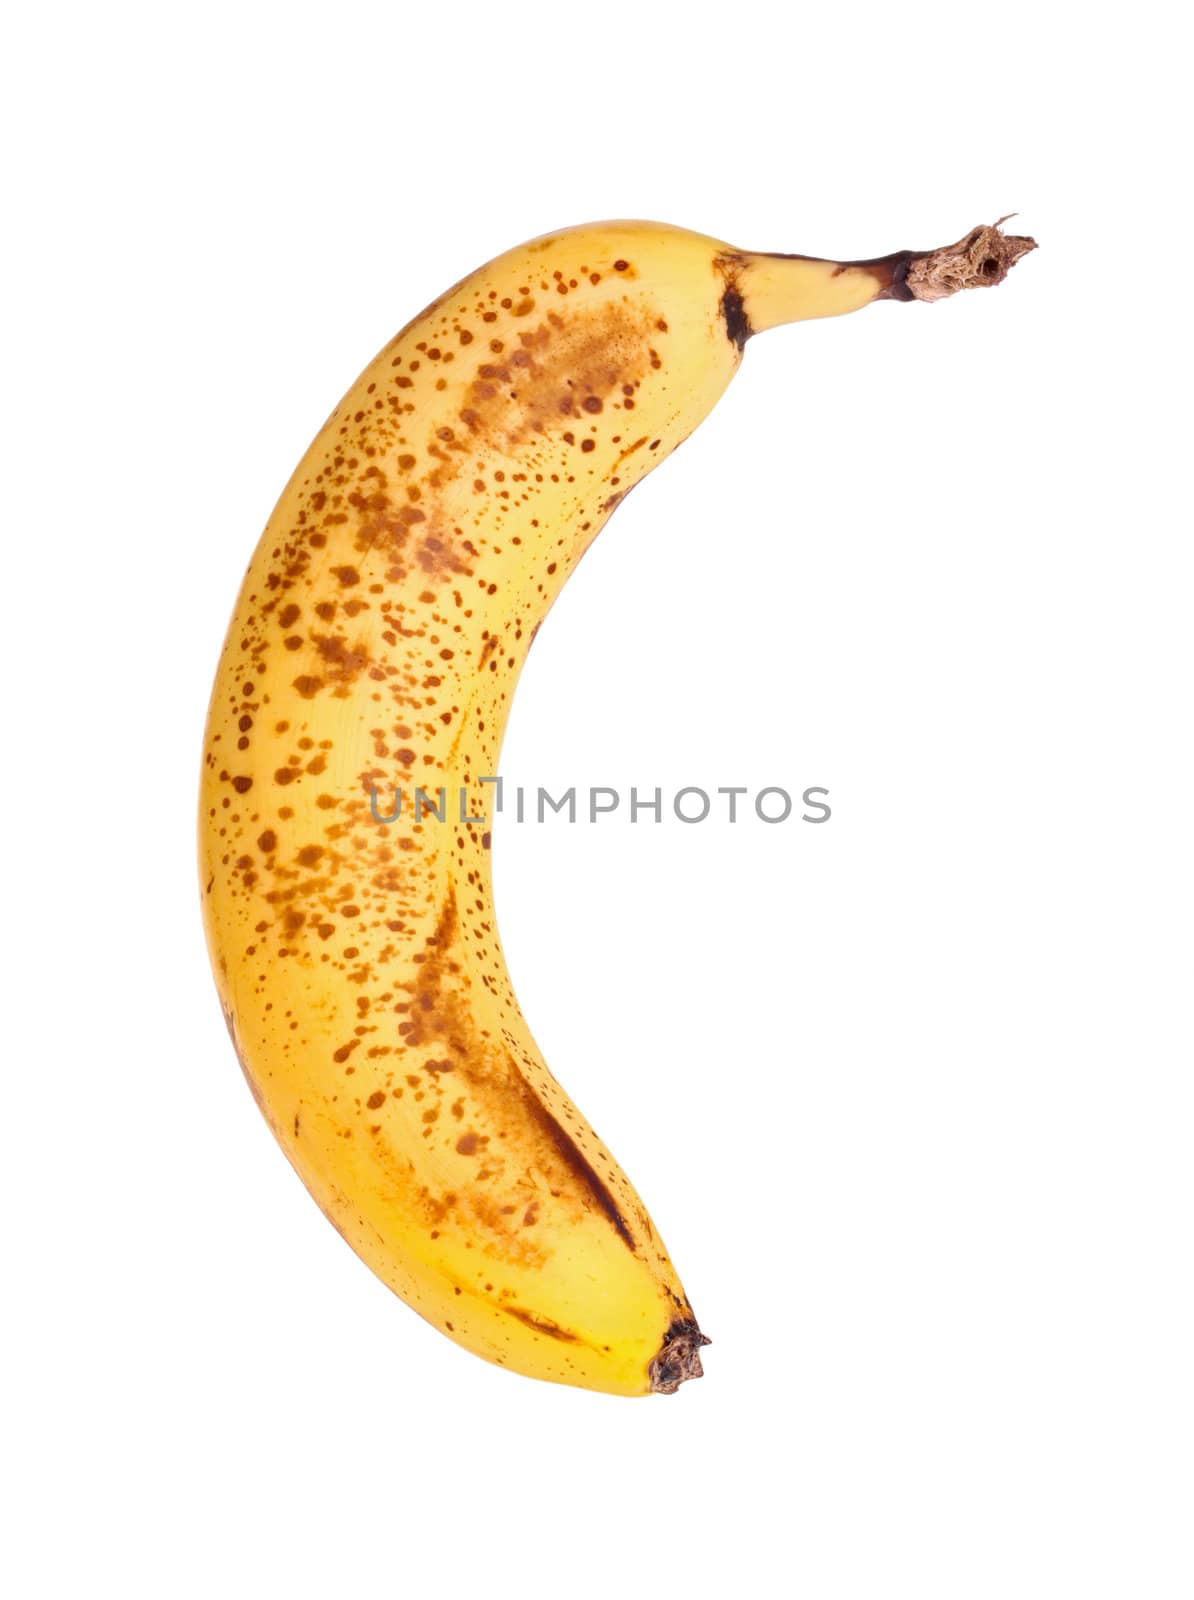 Perfectly ripe, brown-spotted banana isolated against a white background